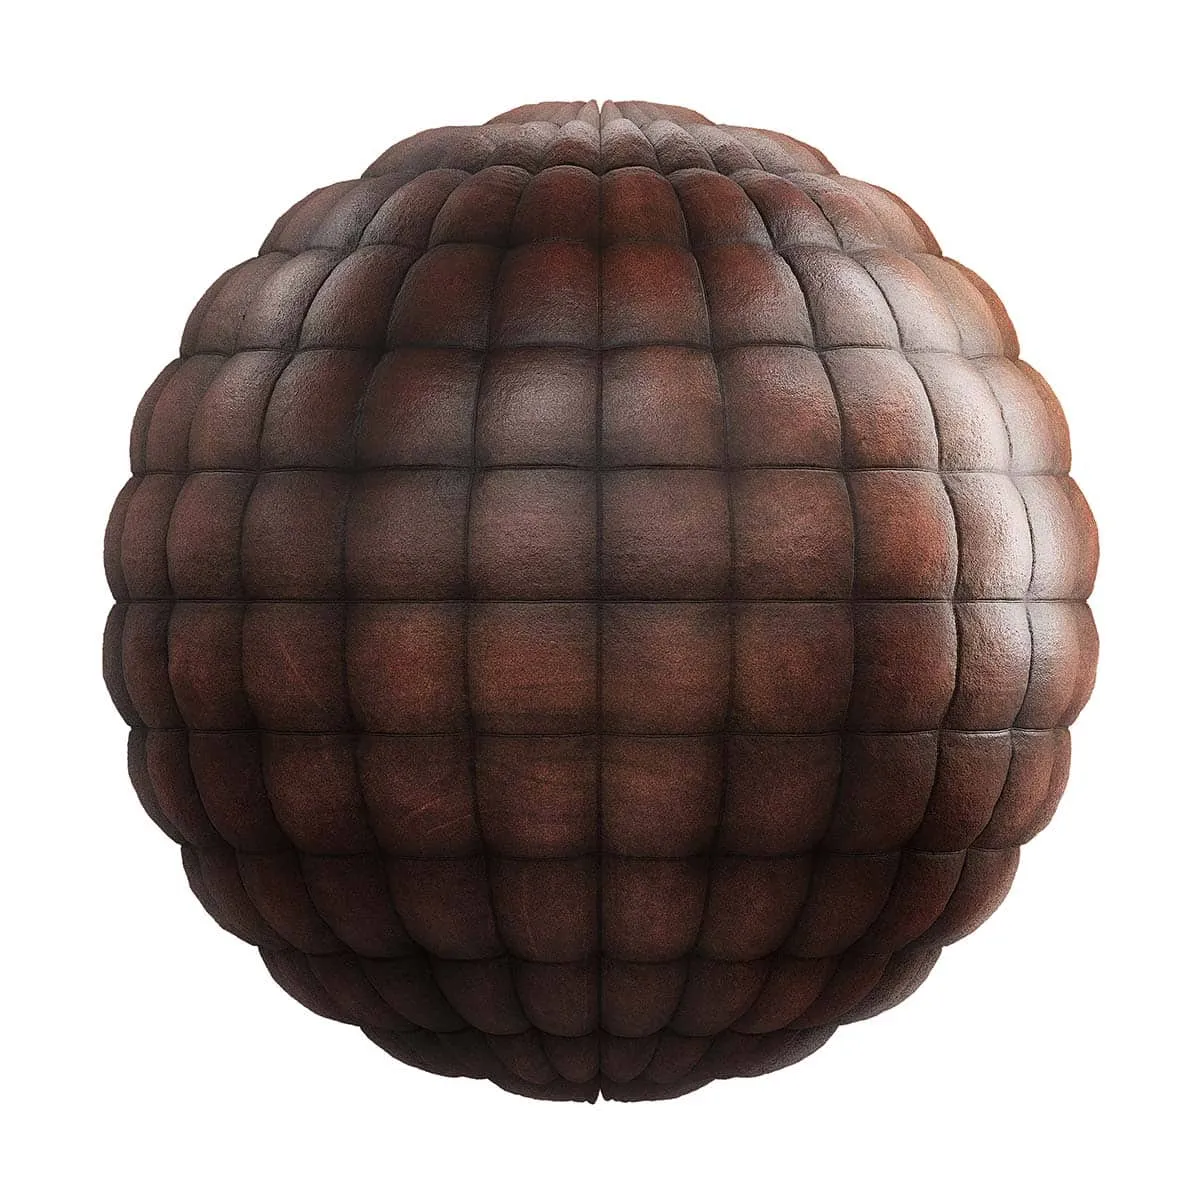 PBR Textures Volume 27 – Fabrics – 4K – 8K – quilted_brown_leather_26_50